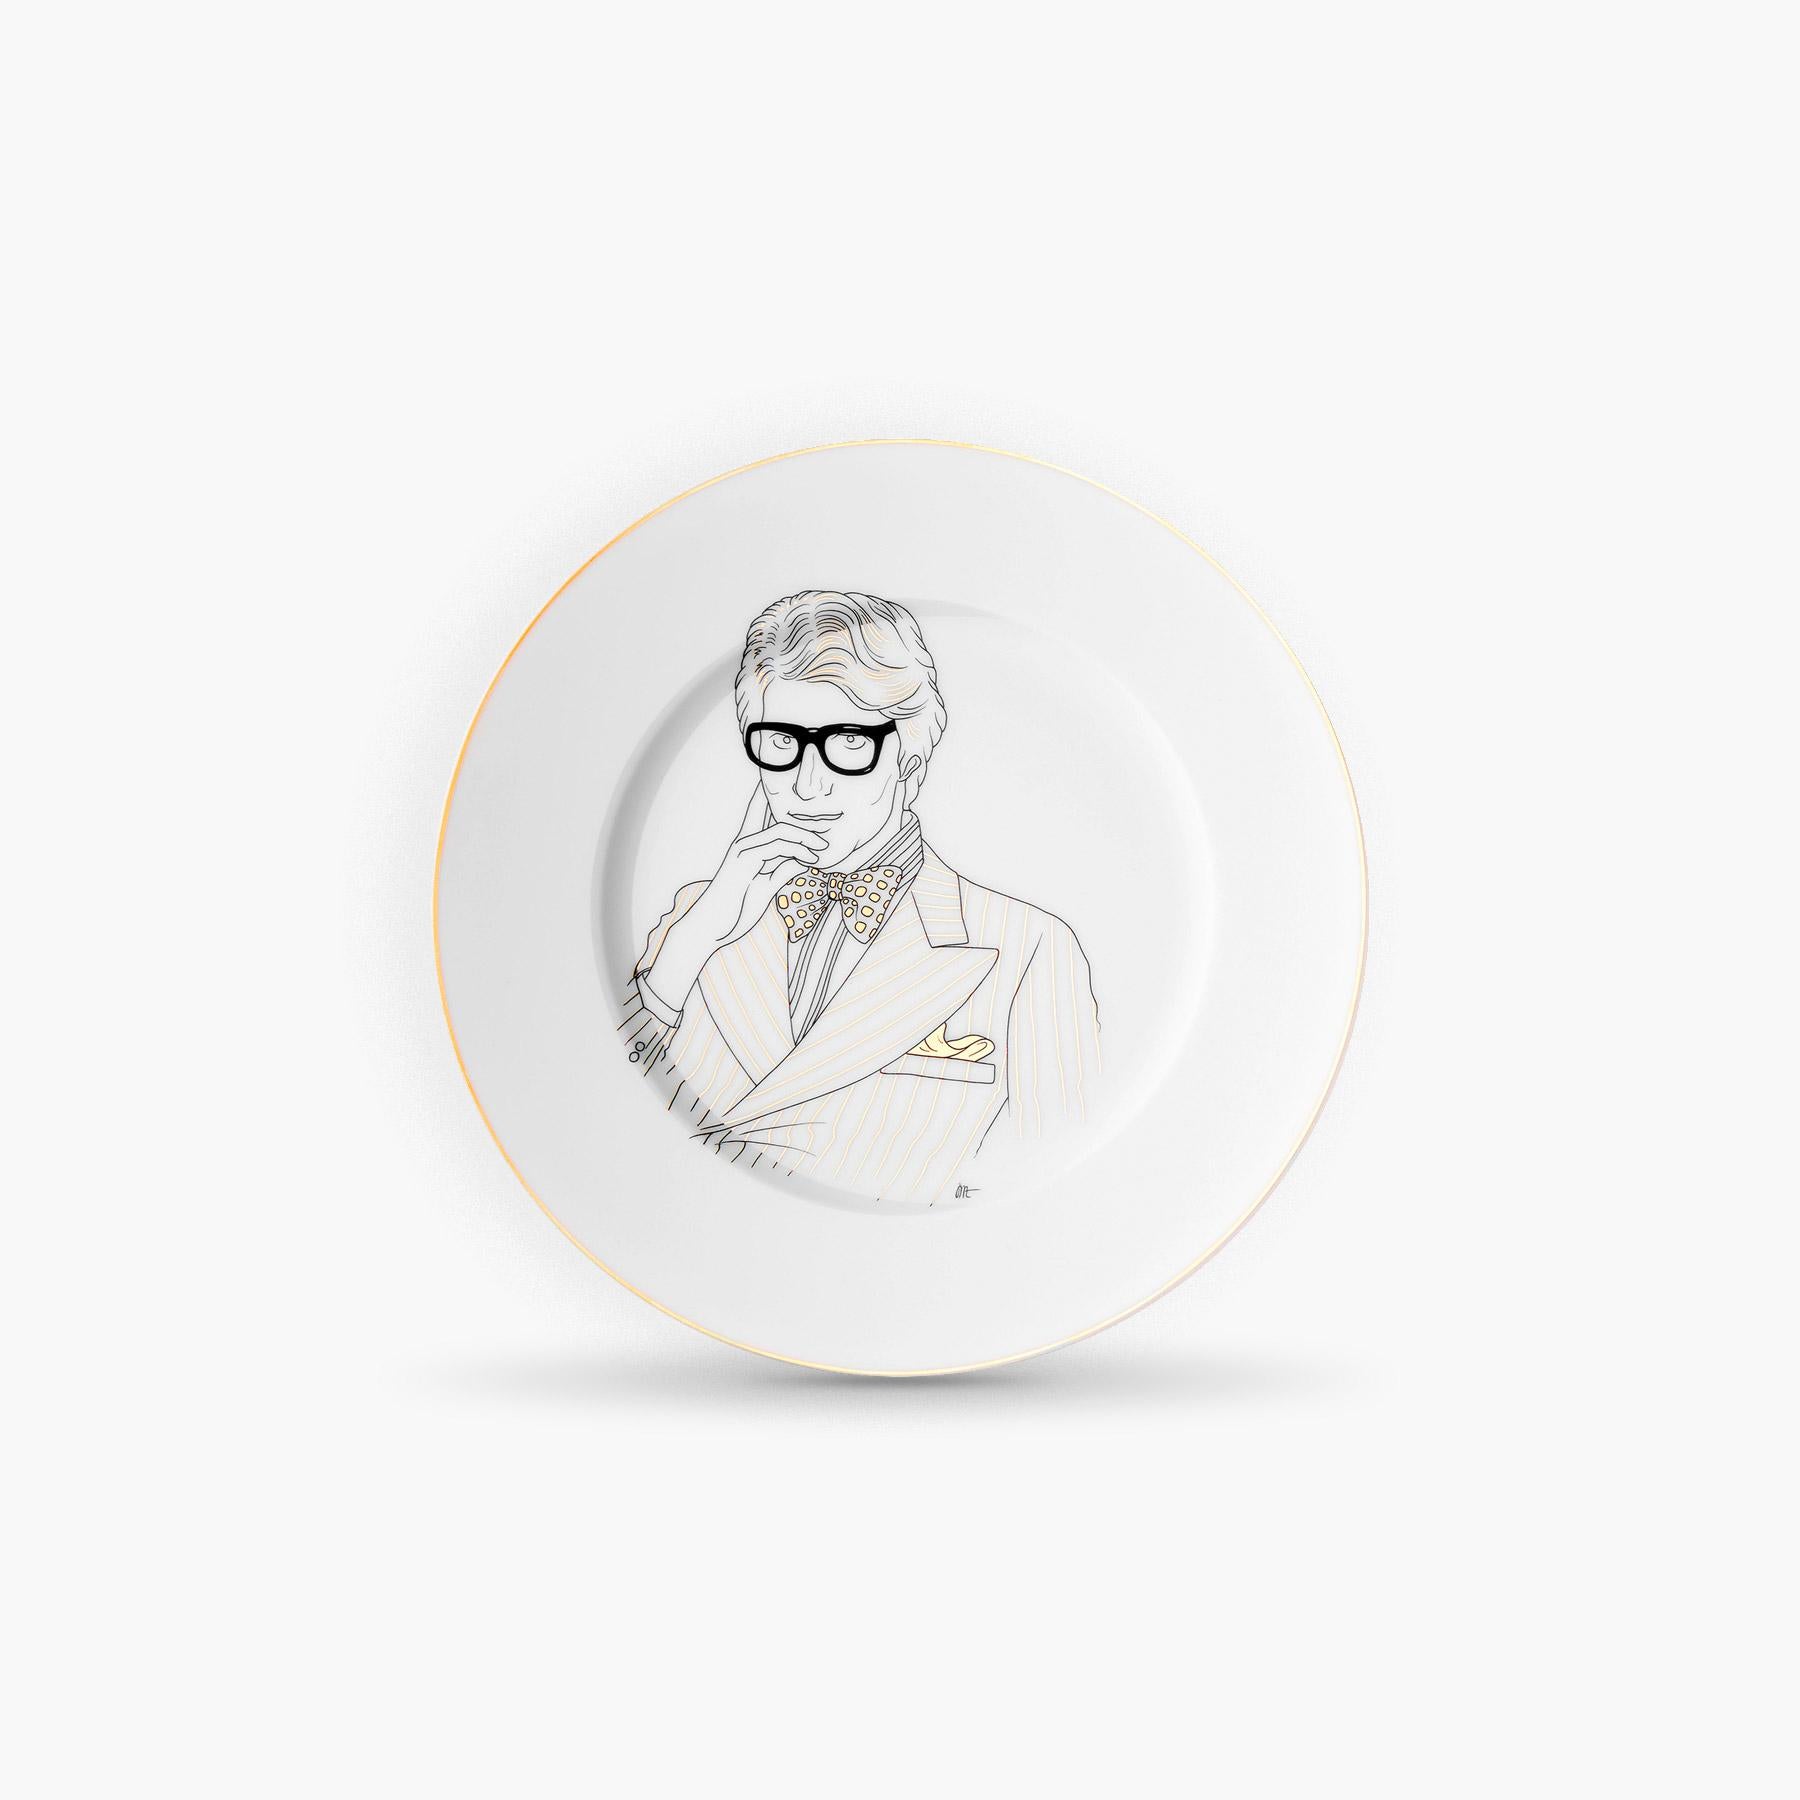 Maison Fragile and the Parisian Jean-Michel Tixier artist illustrator have joined together to create a collection tribute to these men and women, key figures of history, who have made Paris is Paris.

Porcelaine of Limoges extra fine.
Serigraphy